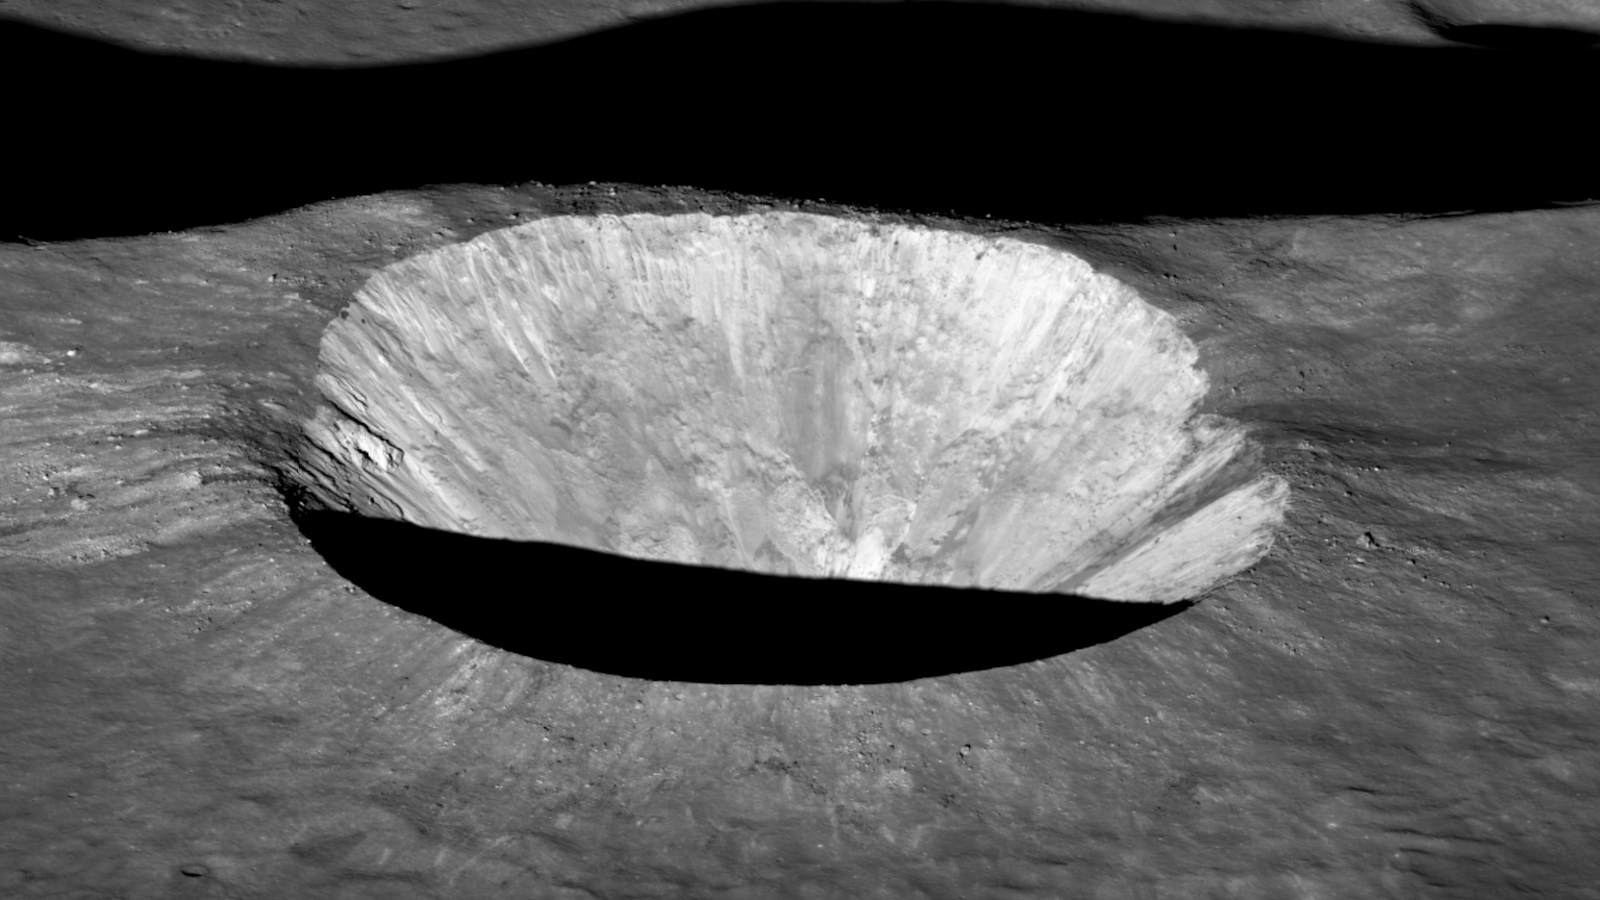 Dramatic close-up of a brightly lit lunar crater, seen at oblique angle. The crater's edge casts a deep shadow onto a thin slice of its floor.